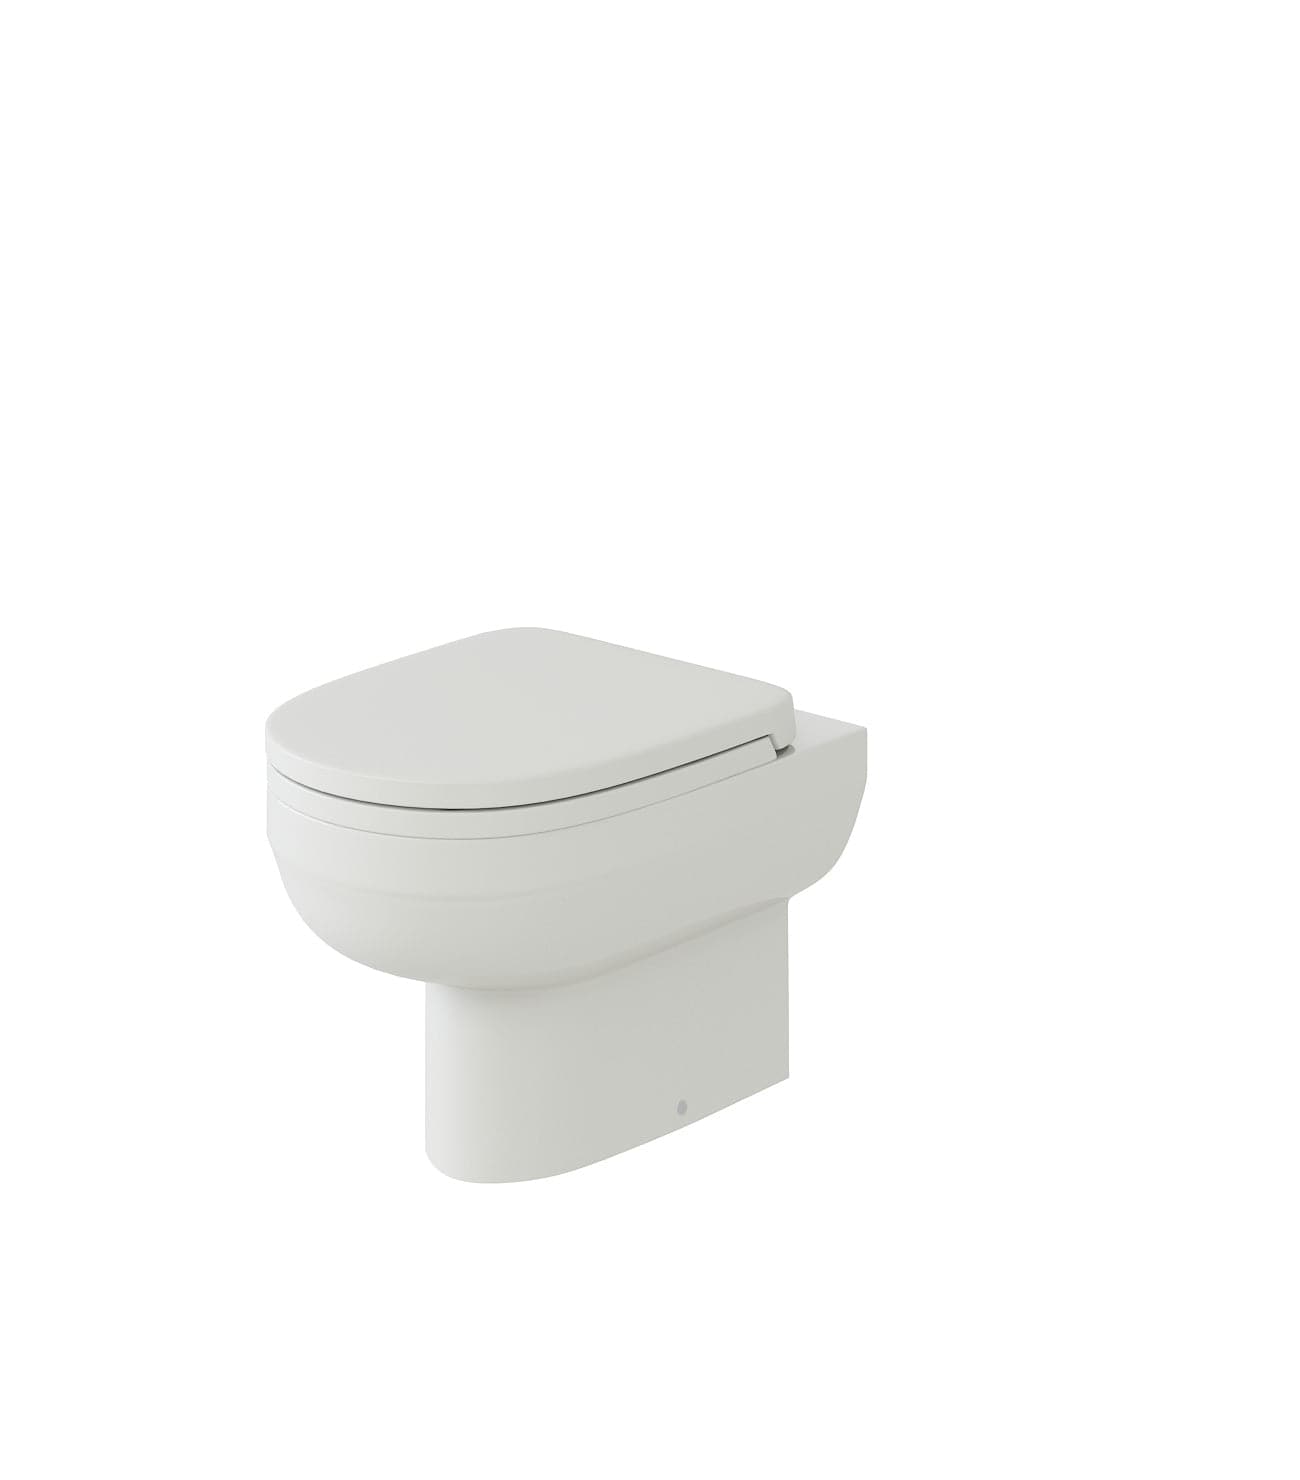 Modern white close coupled toilet with cistern and soft close seat (SLK630), perfect for contemporary UK bathrooms, offering sleek design, efficient flush, and comfort.